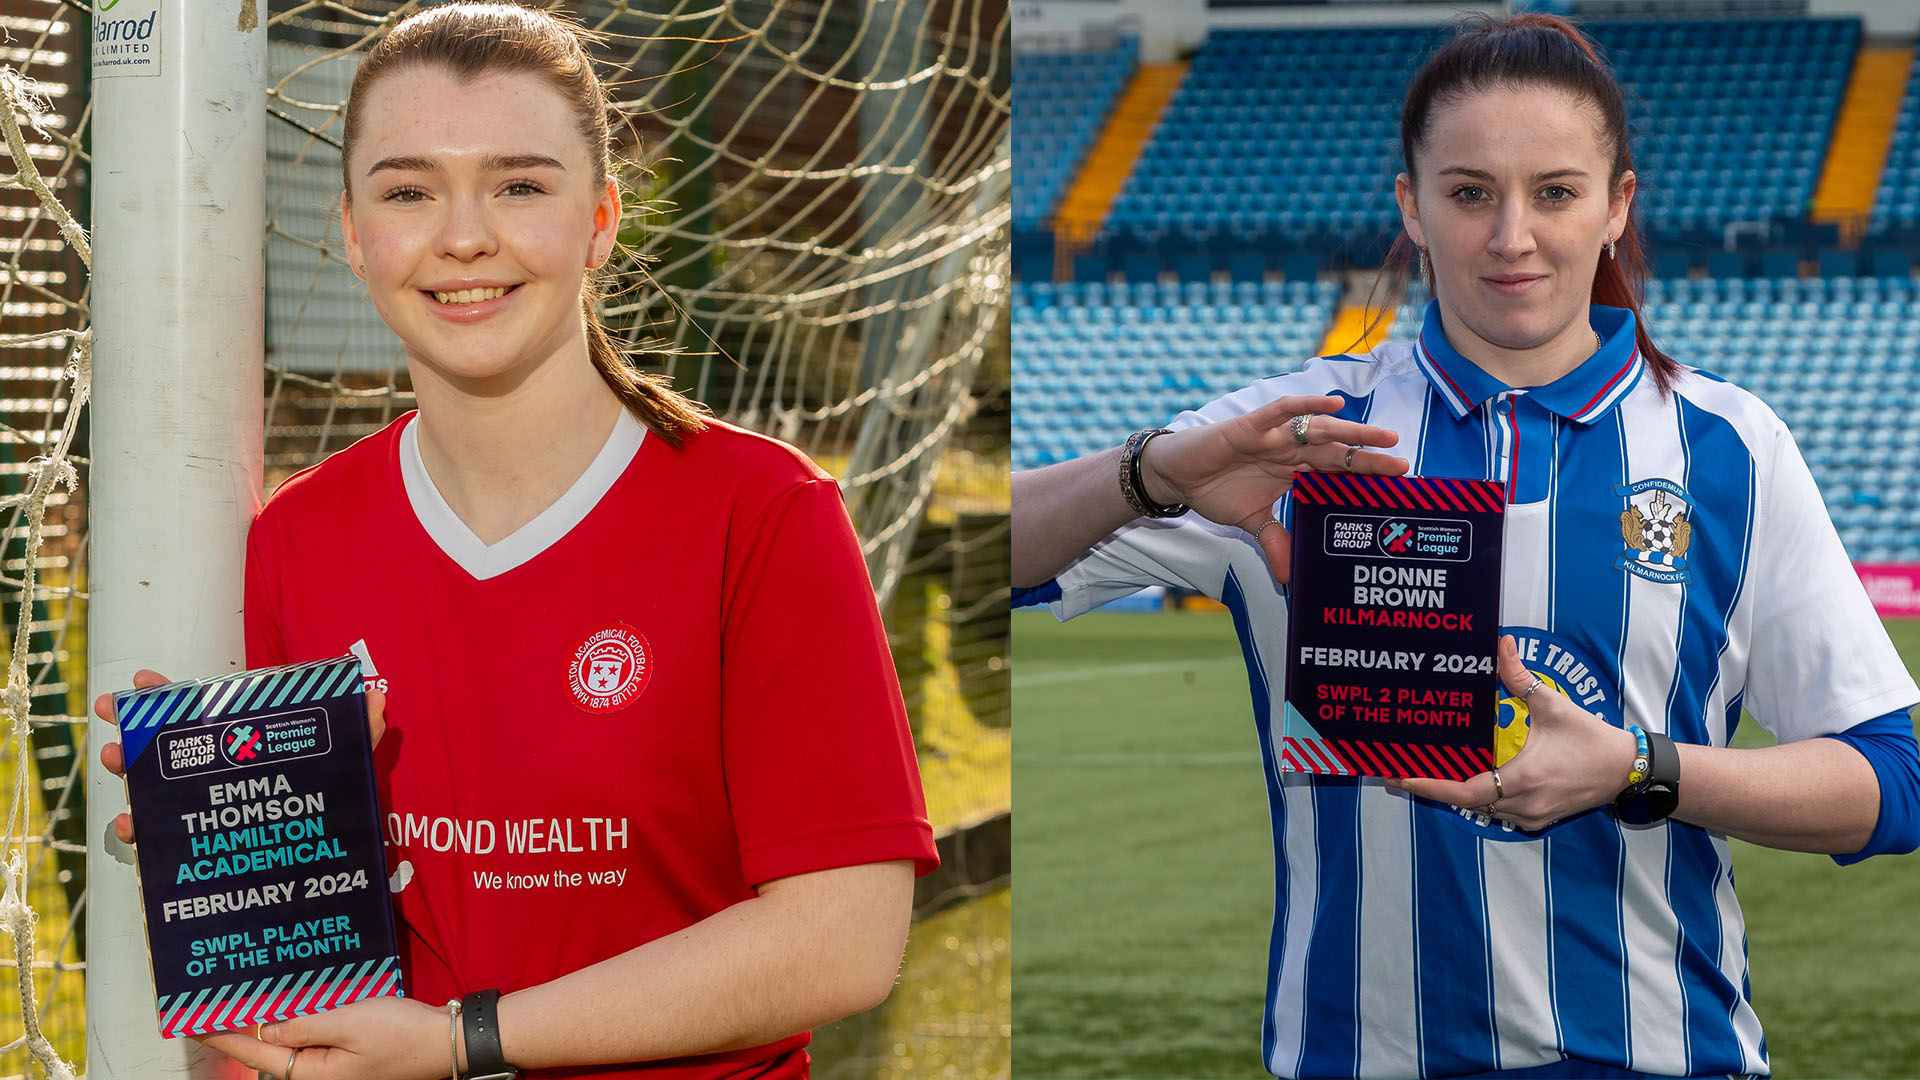 Thomson and Brown win SWPL Player of the Month awards for February